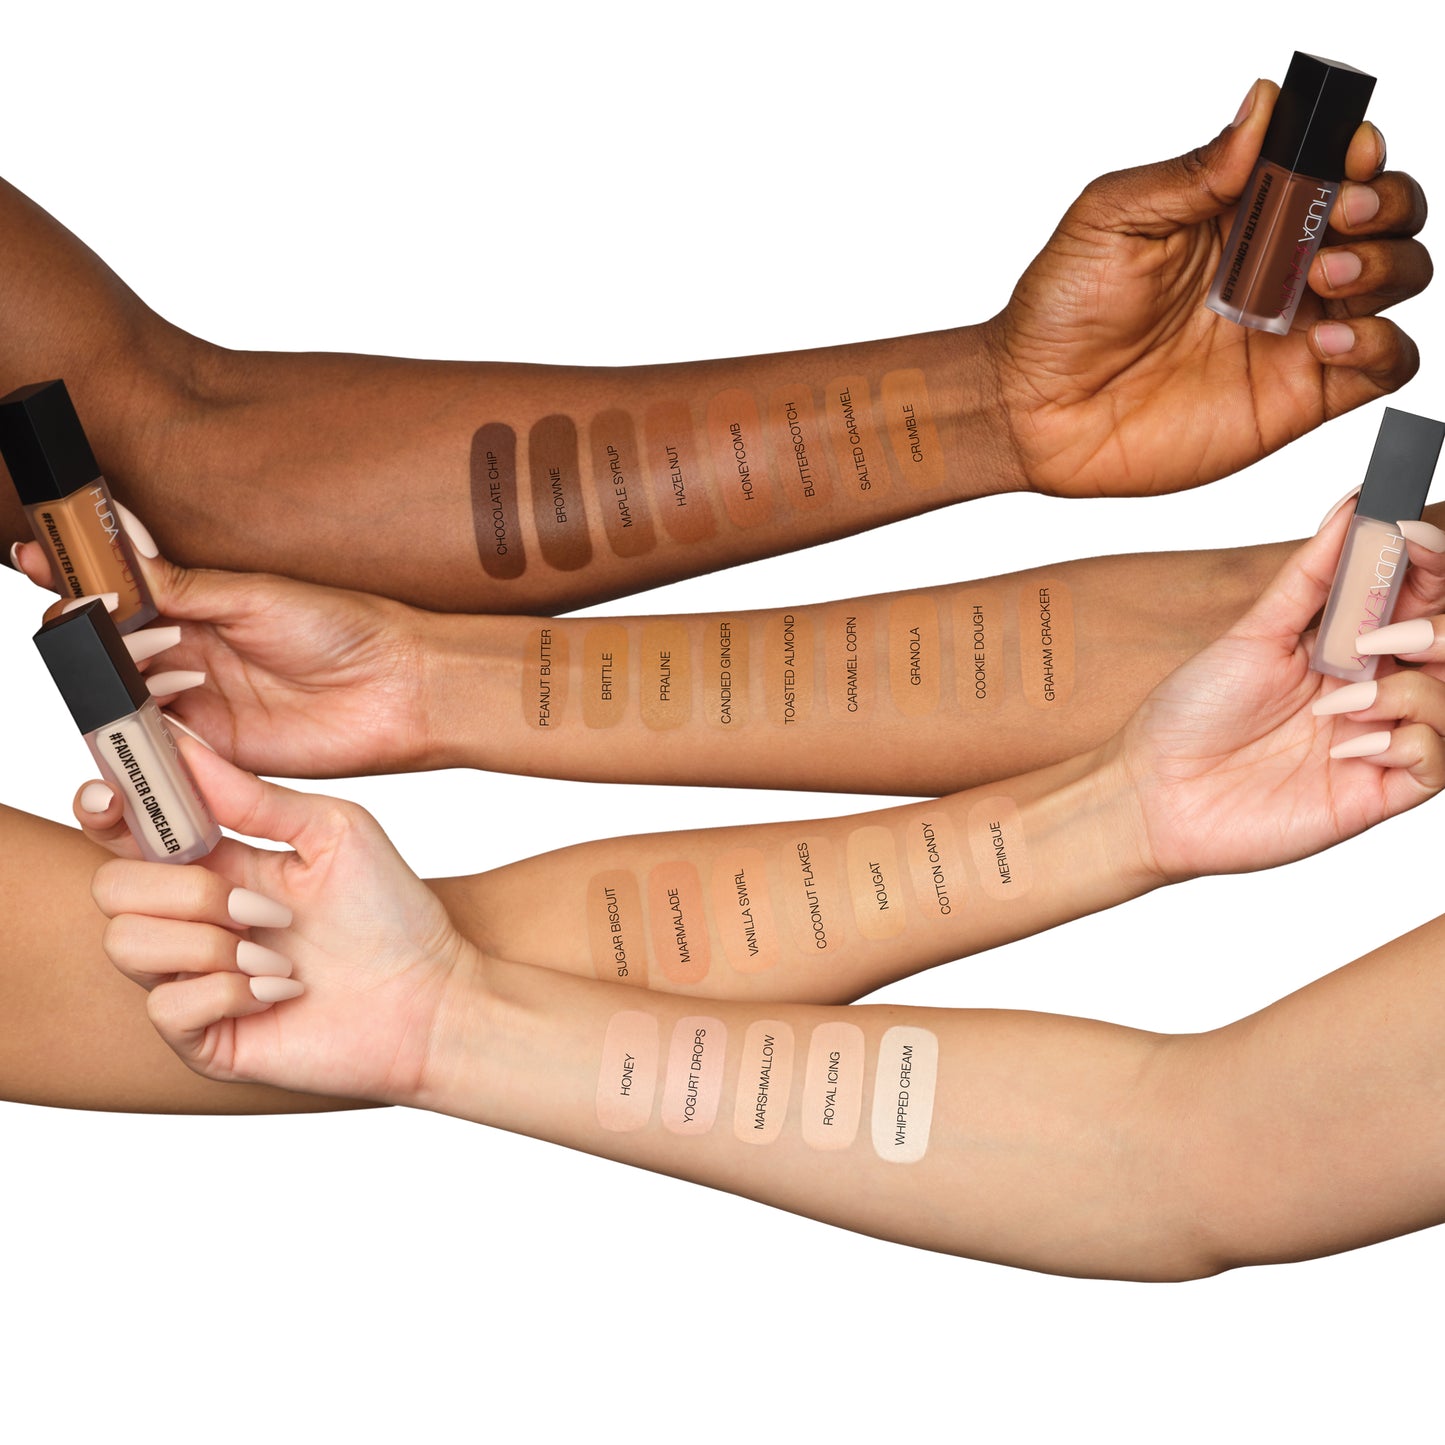 BEAUTY #FauxFilter Luminous Matte Buildable Coverage Crease Proof Concealer